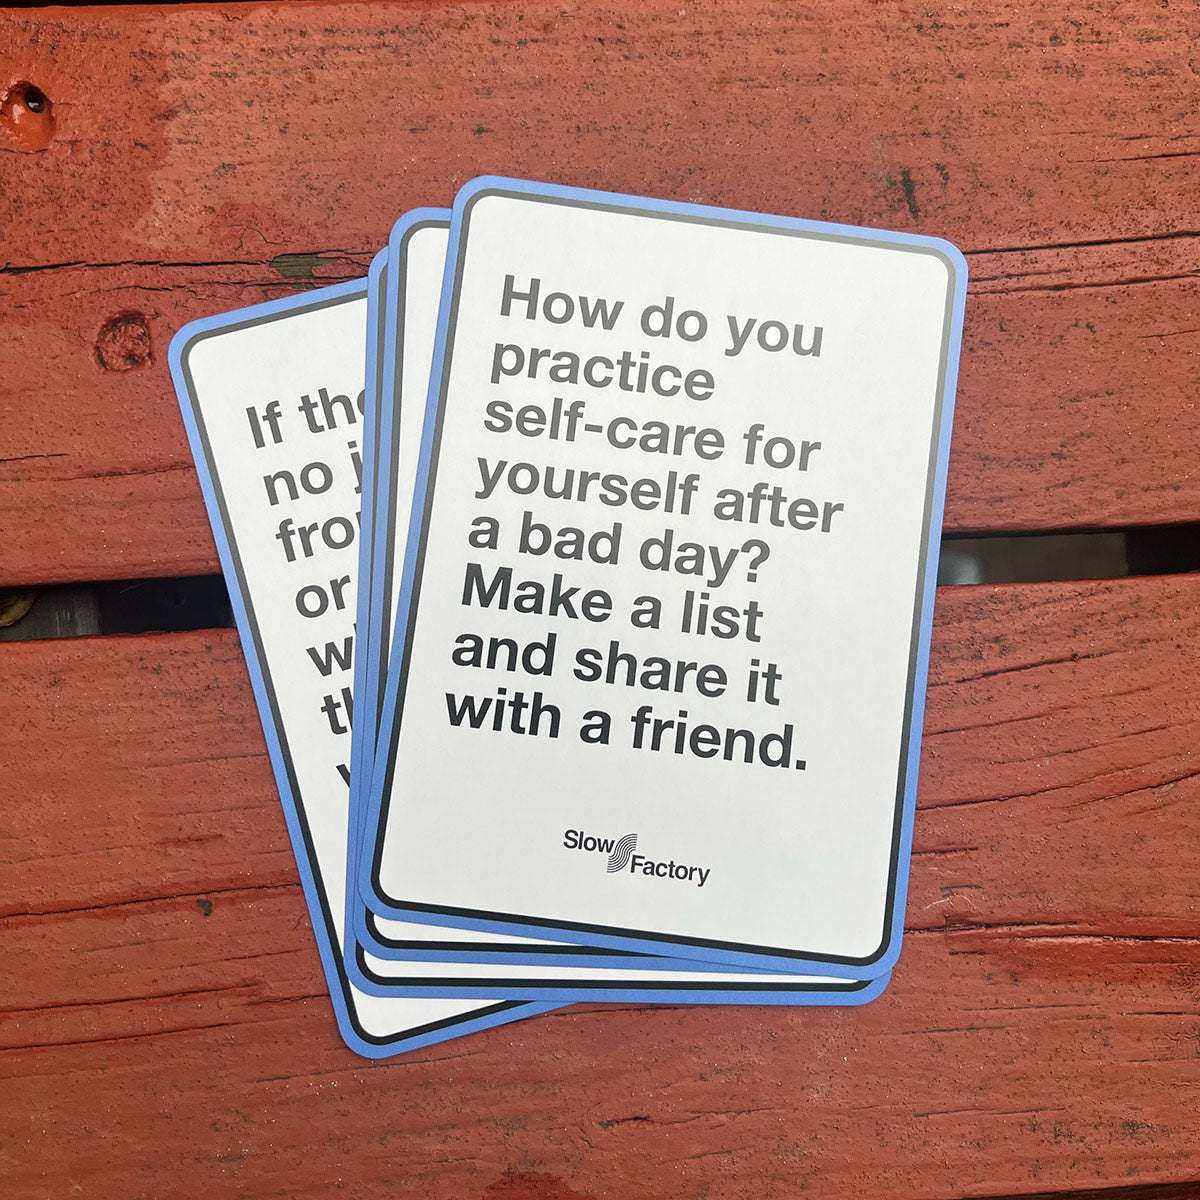 Cards for Collective Care